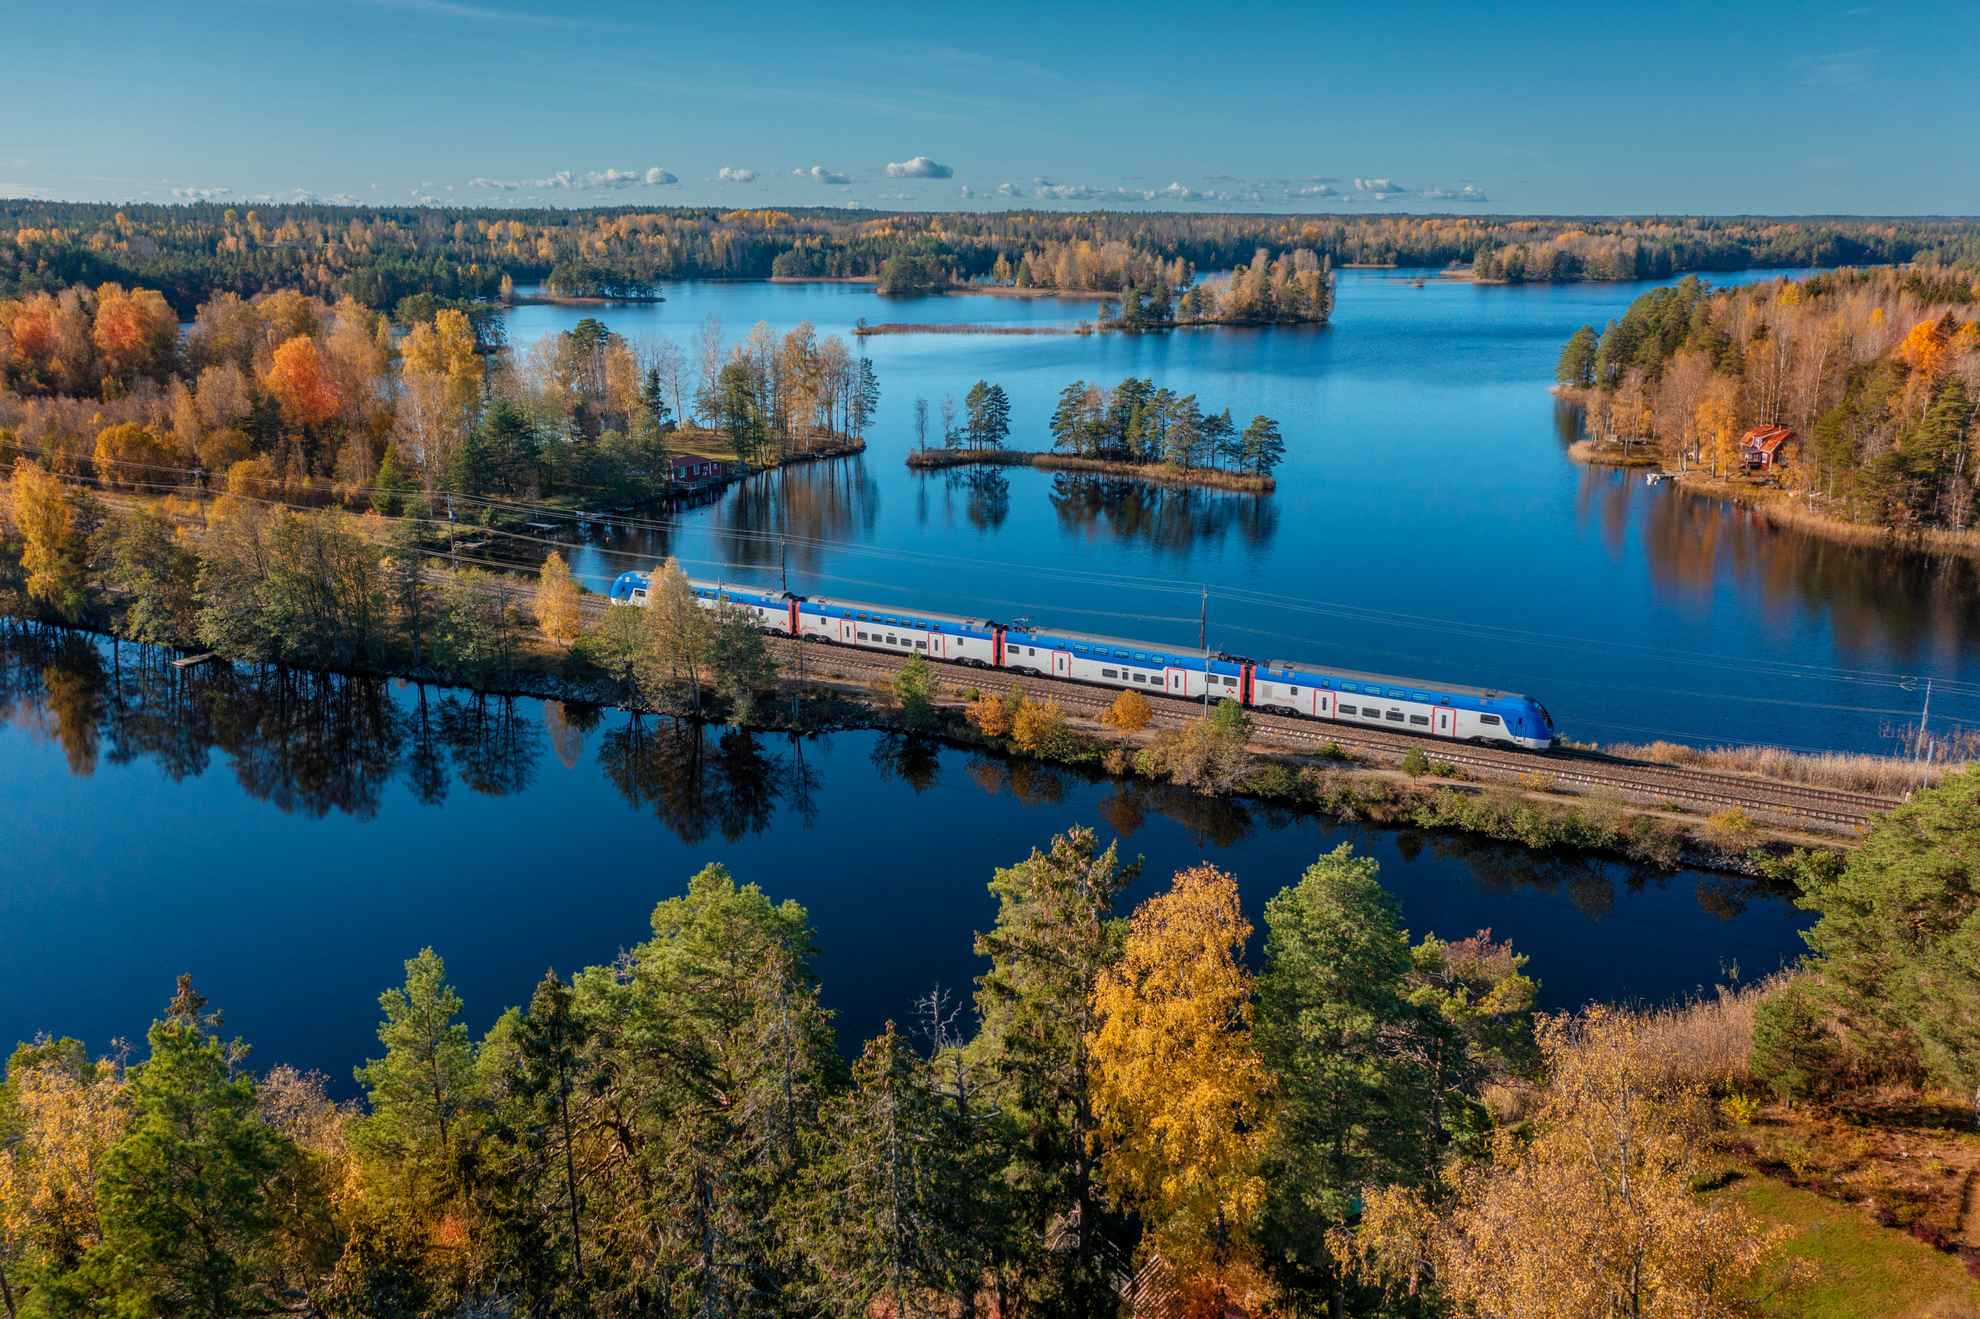 An aerial view of a train passing through a forest landscape with lakes in autumn.